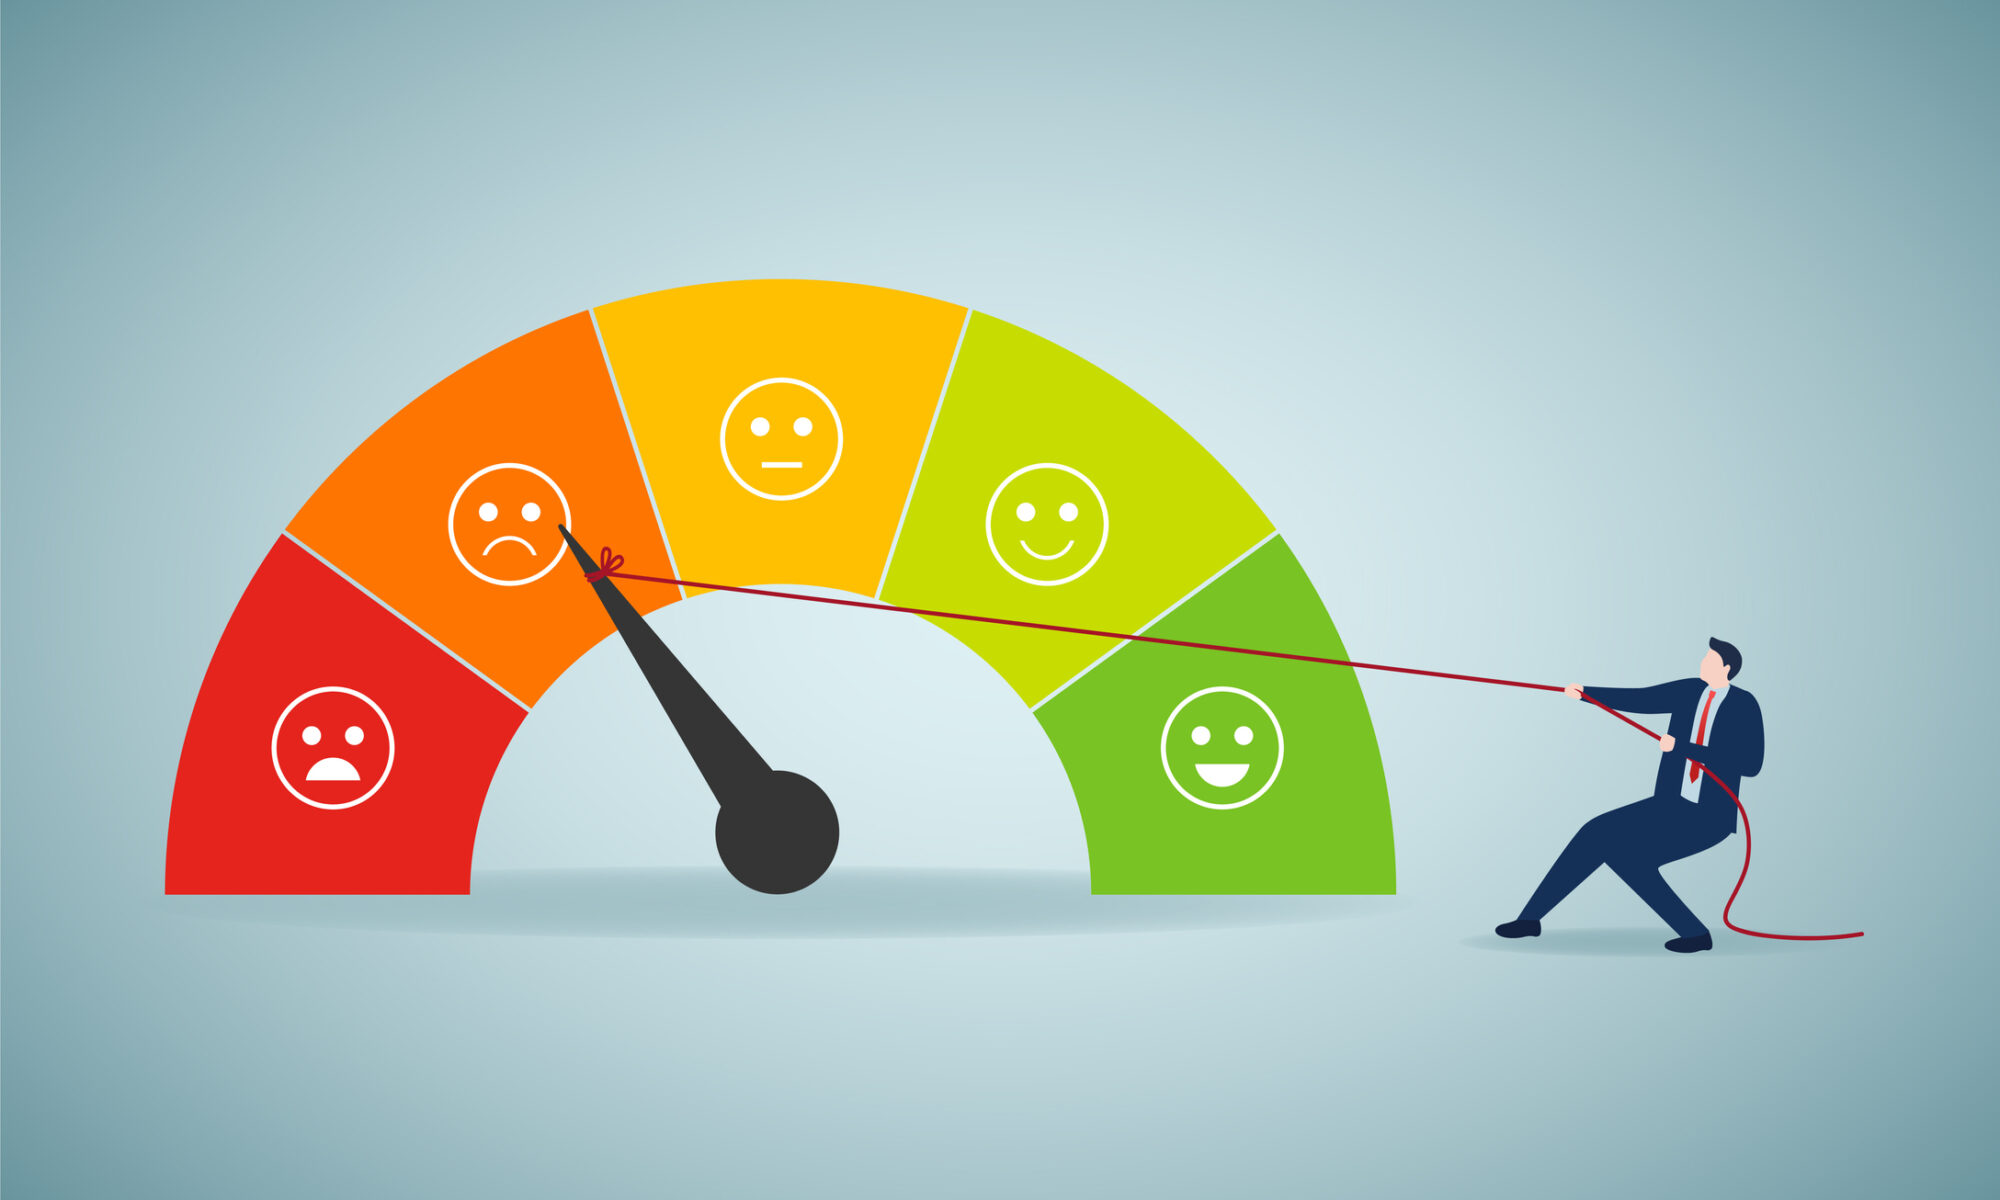 Negative Review Response for eCommerce and Fulfillment Services